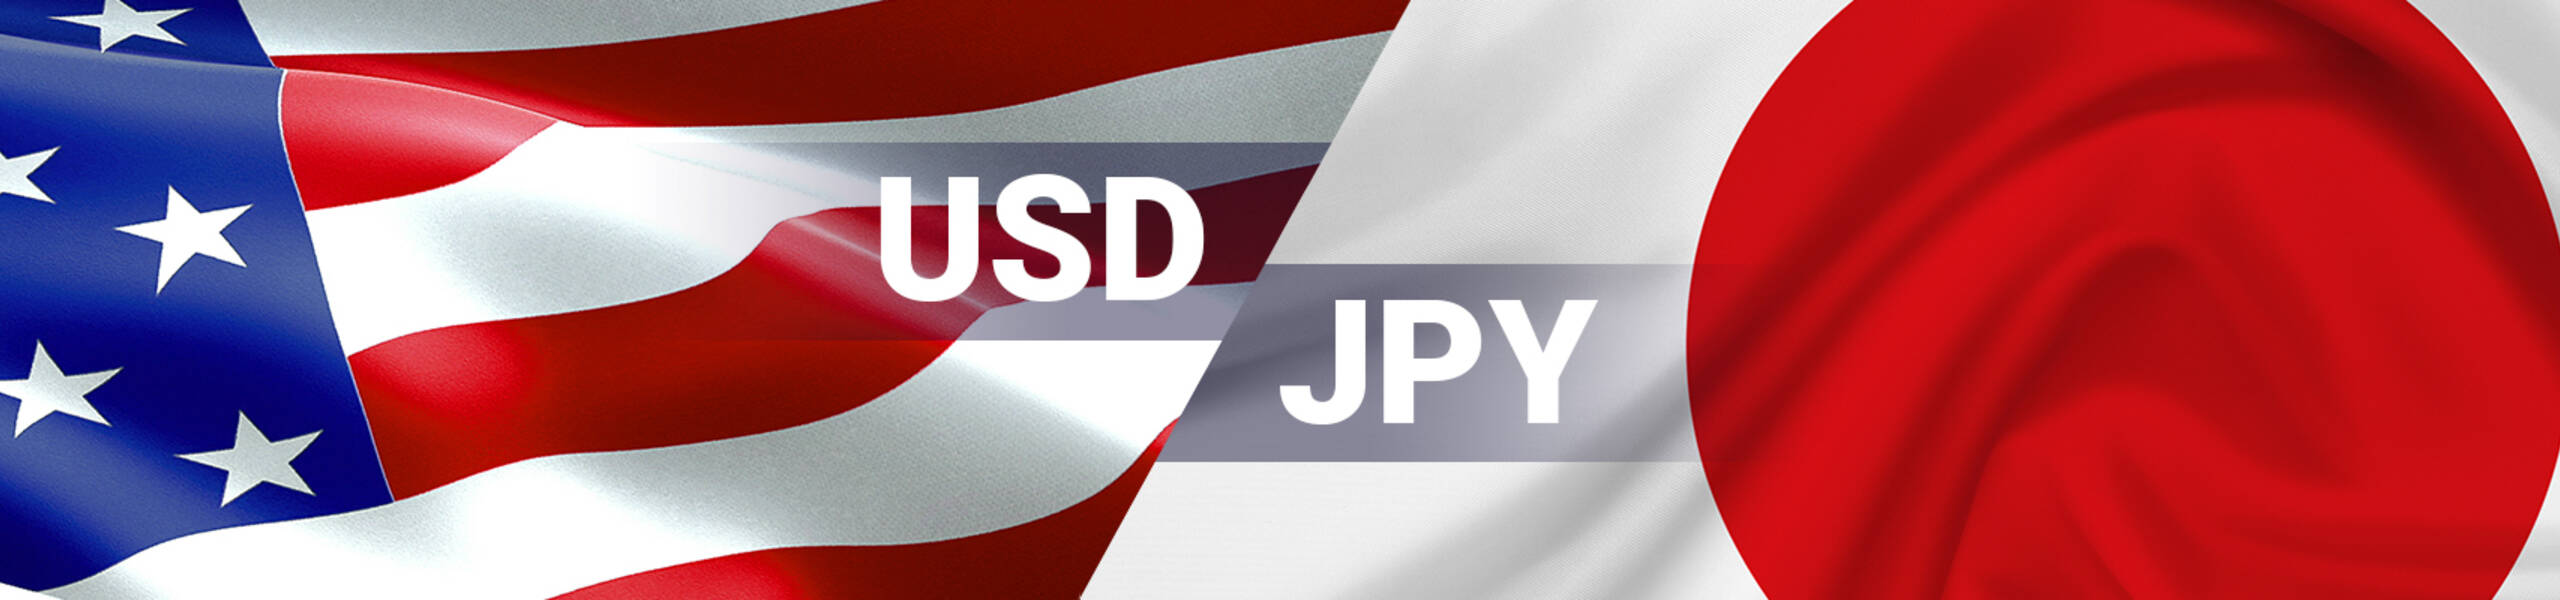 USD/JPY Dailyレポート 2017/08/16